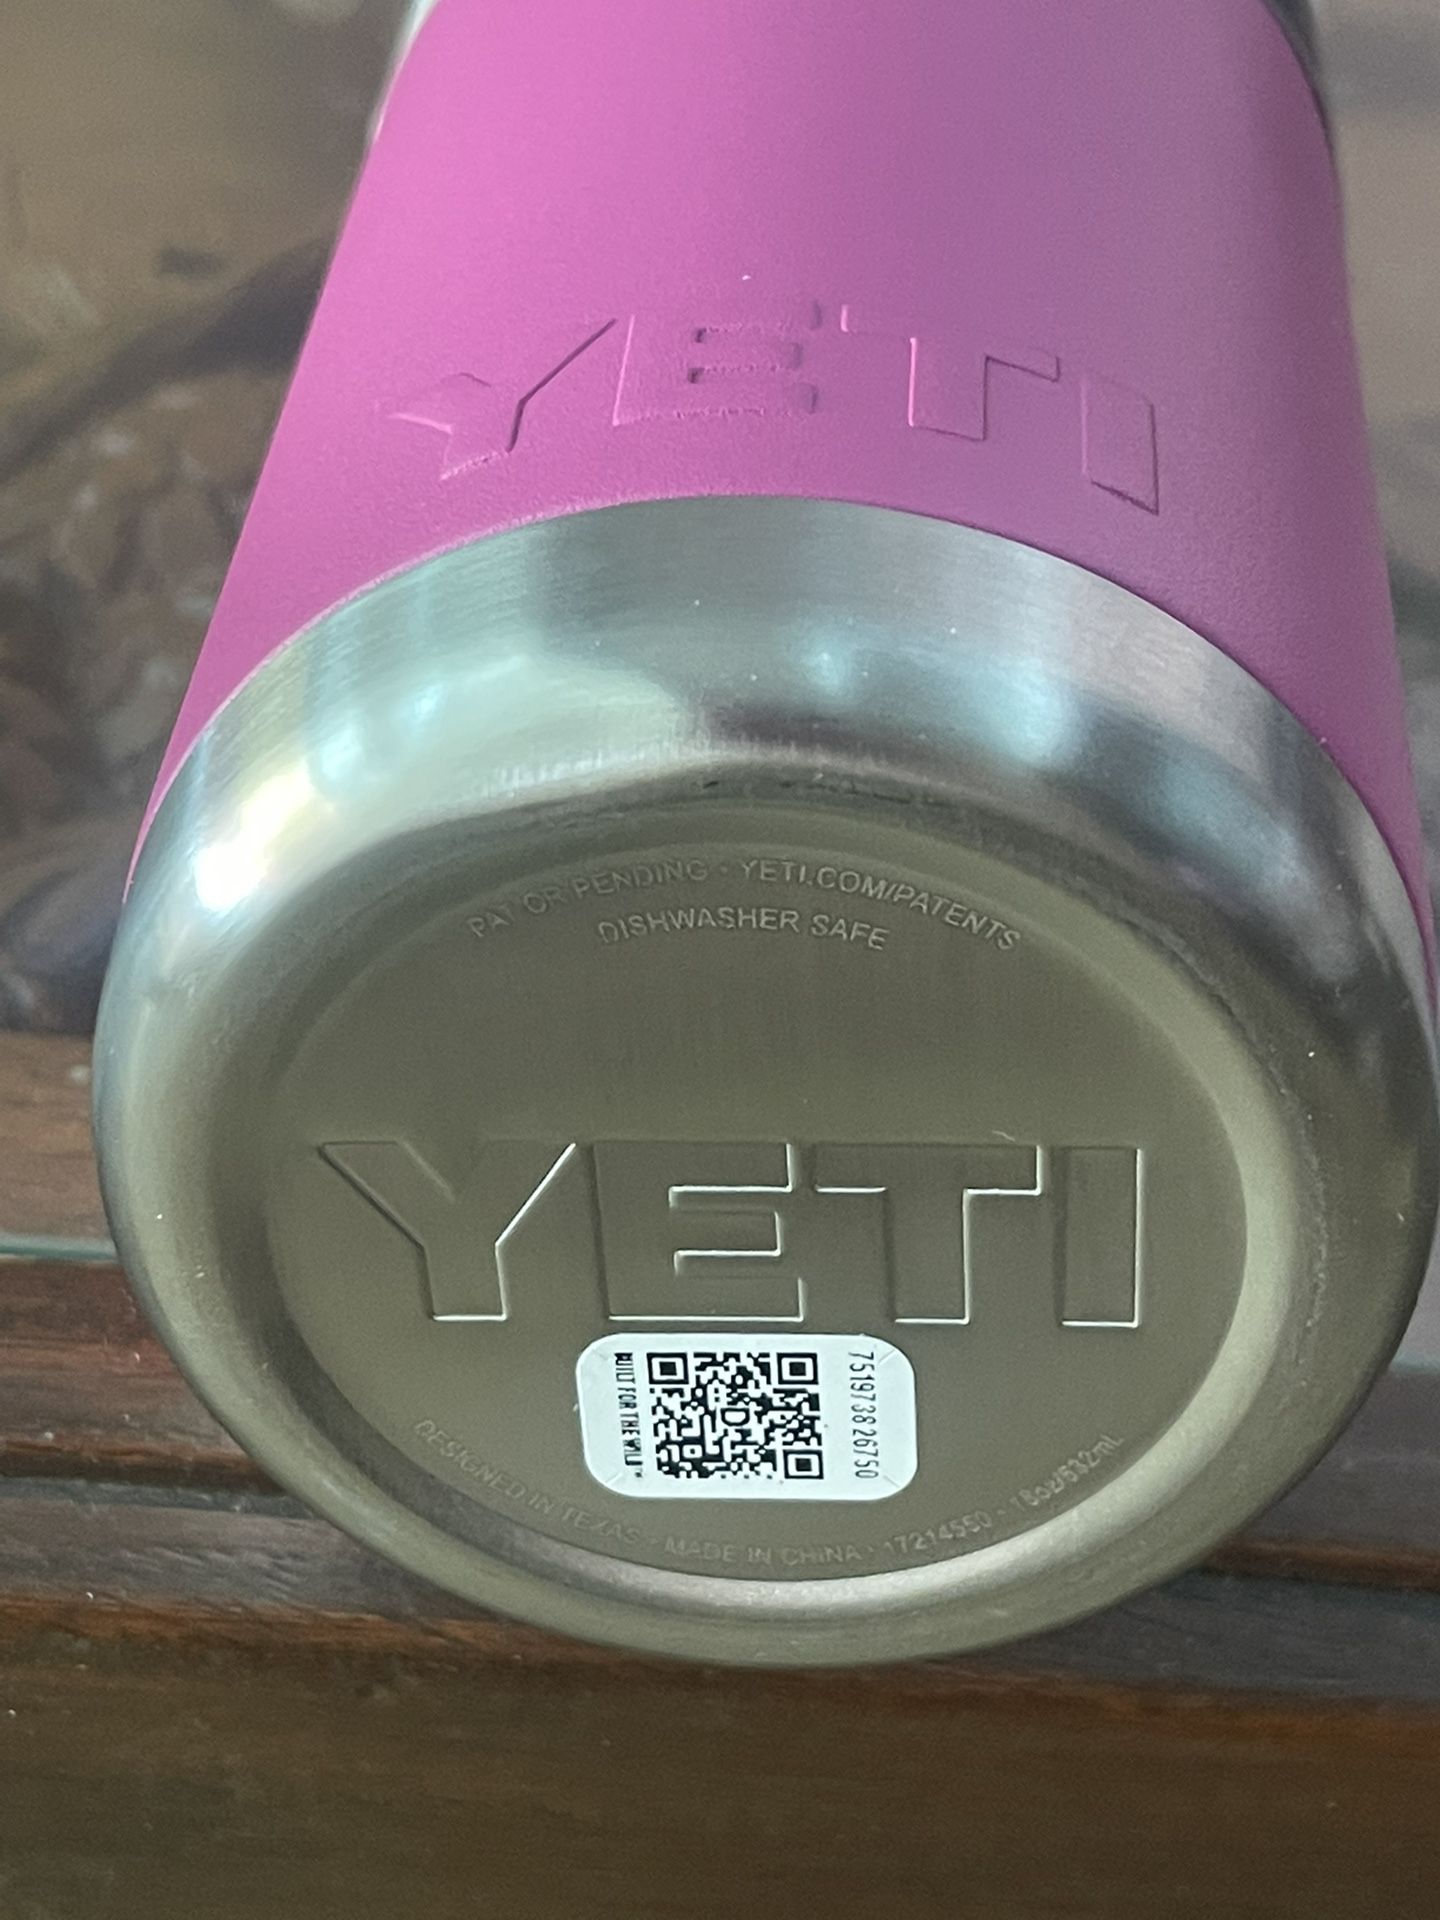 Yeti Limited Edition Brick Bottle Opener for Sale in Cleveland, OH - OfferUp